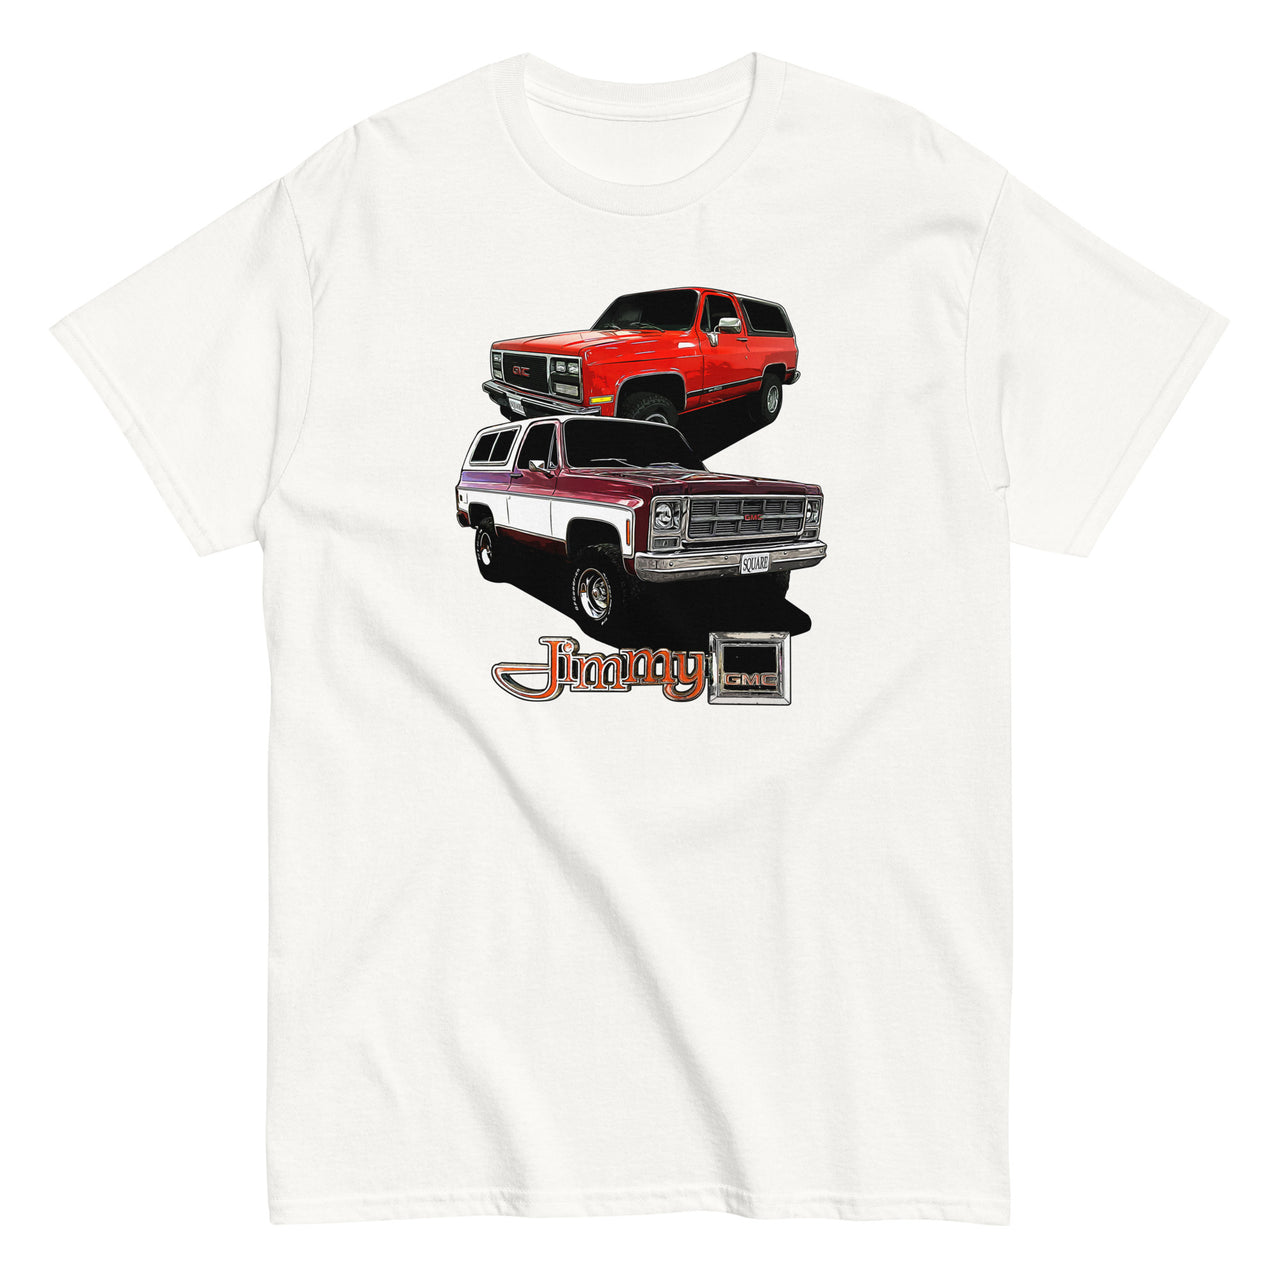 Square Body GMC Jimmy T-Shirt in white